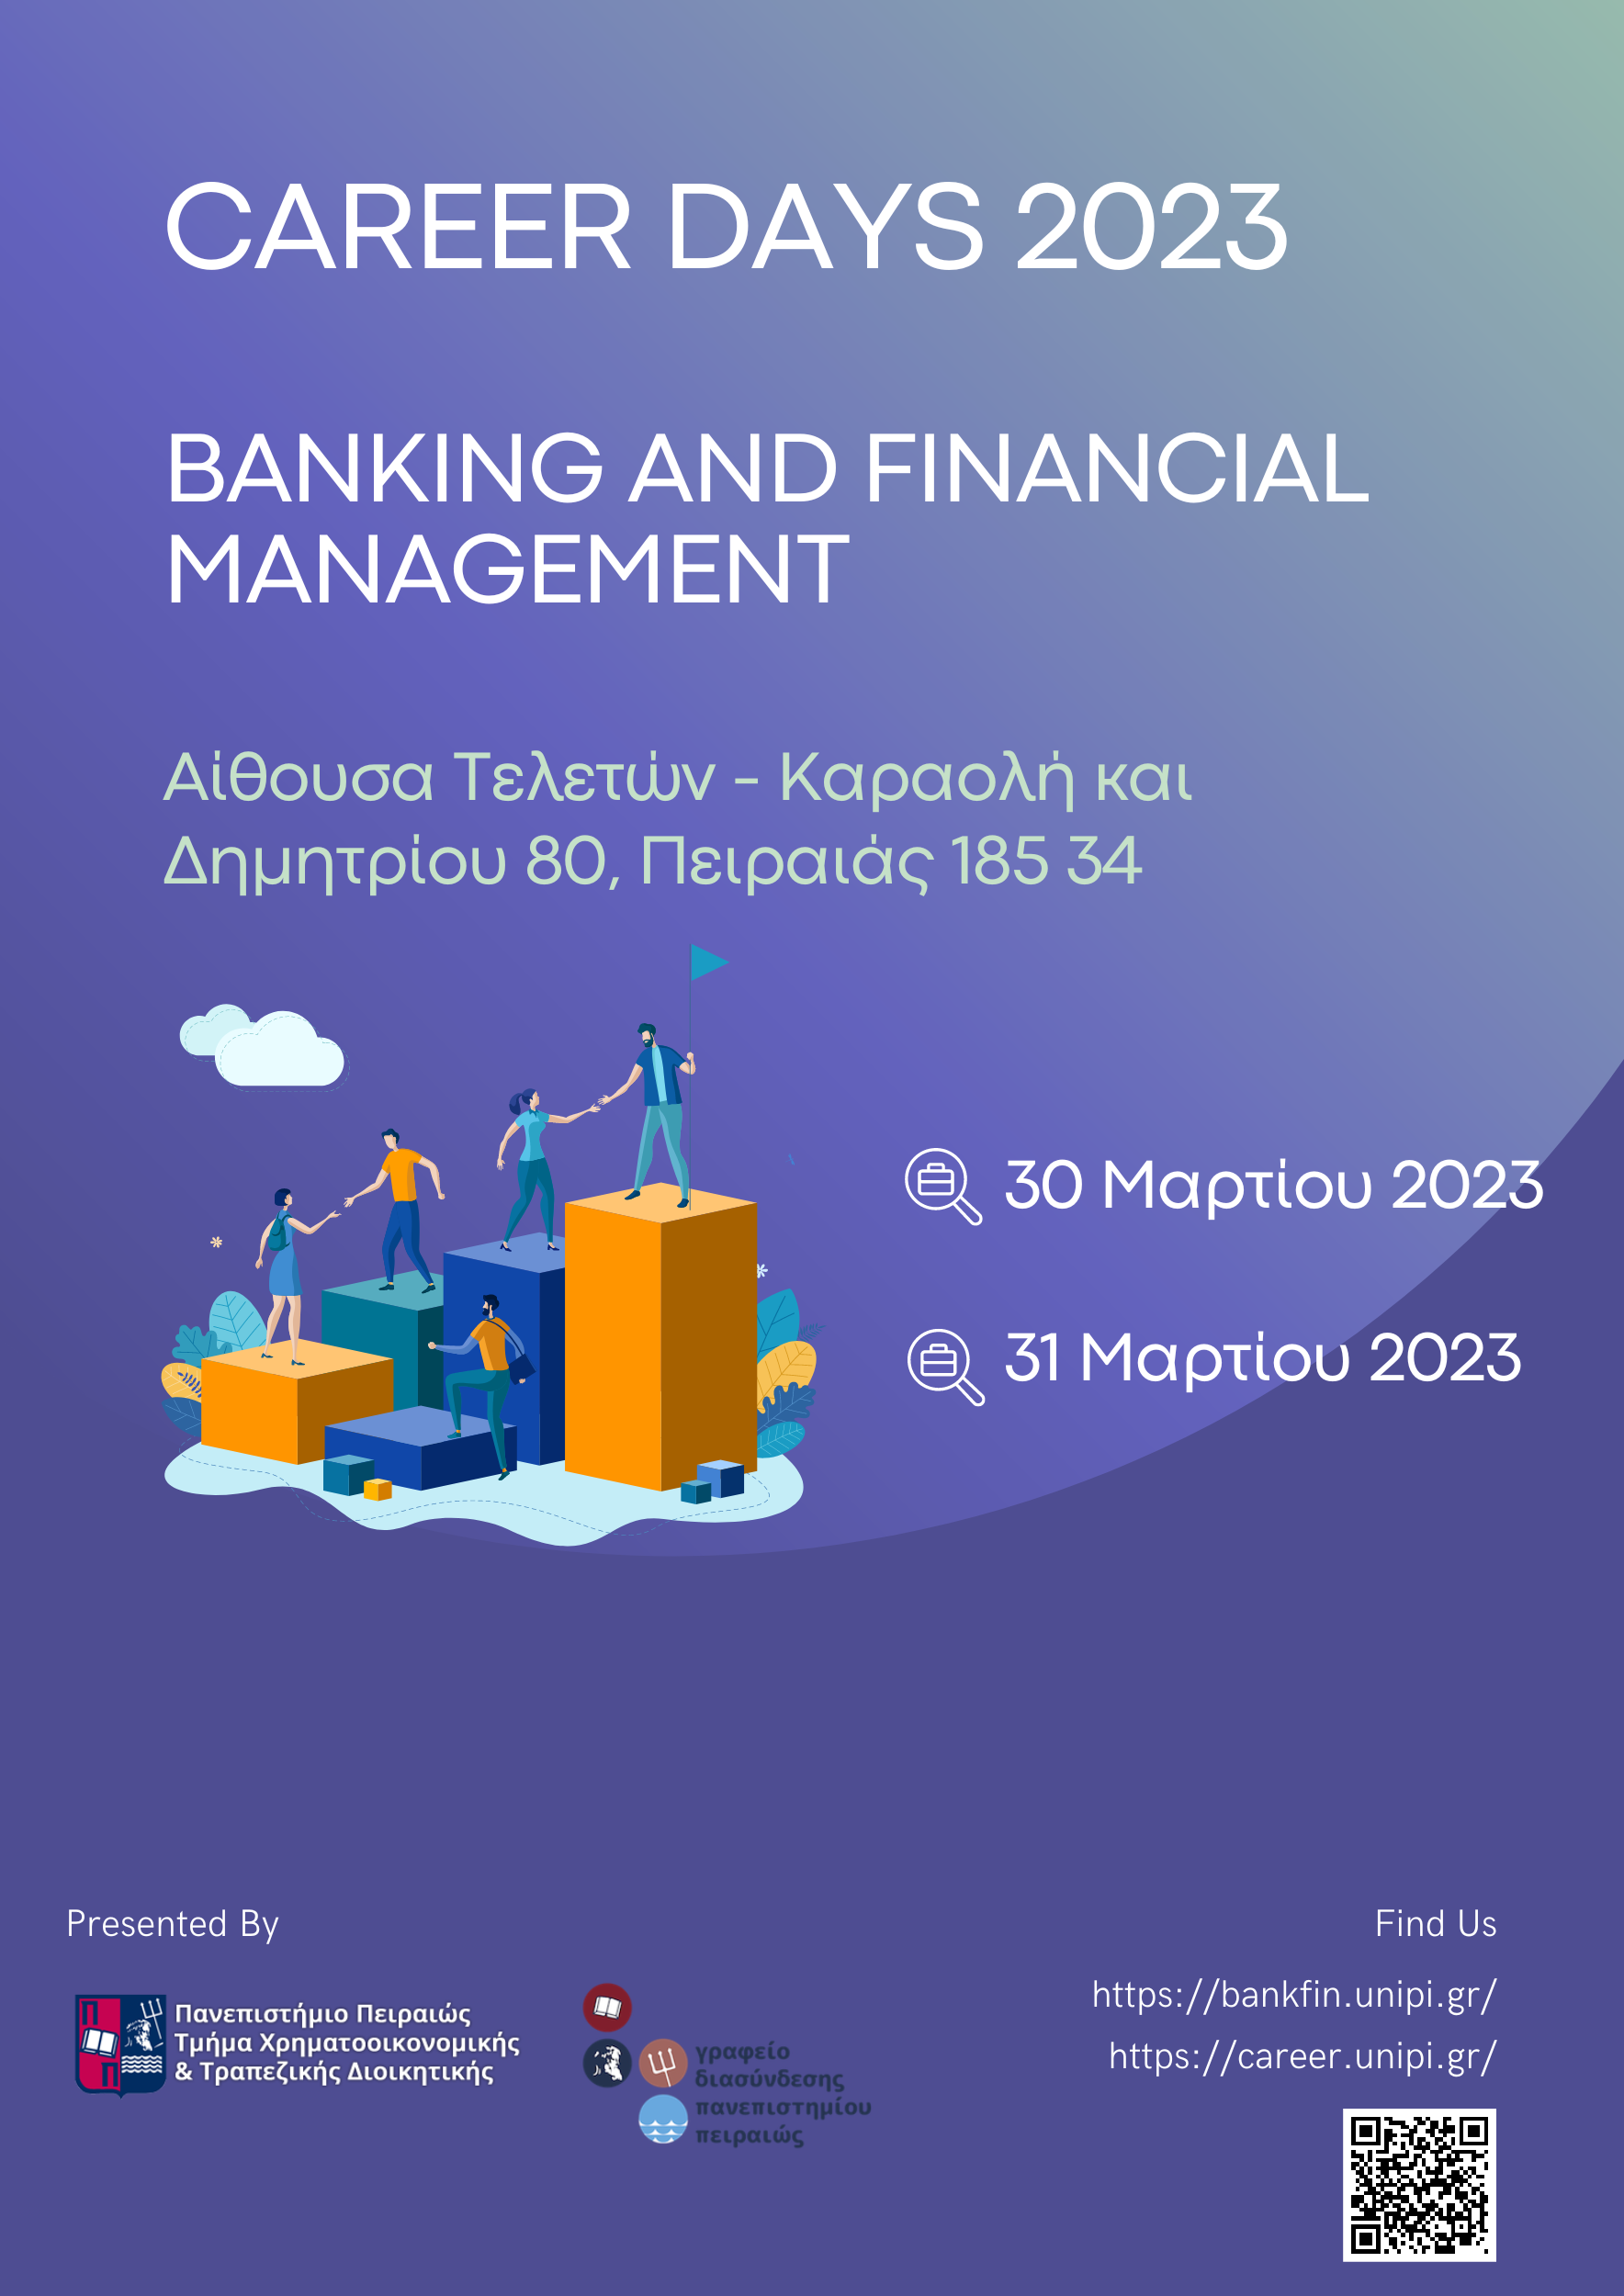 CAREER DAYS 2023 BANKING AND FINANCIAL MANAGEMENT